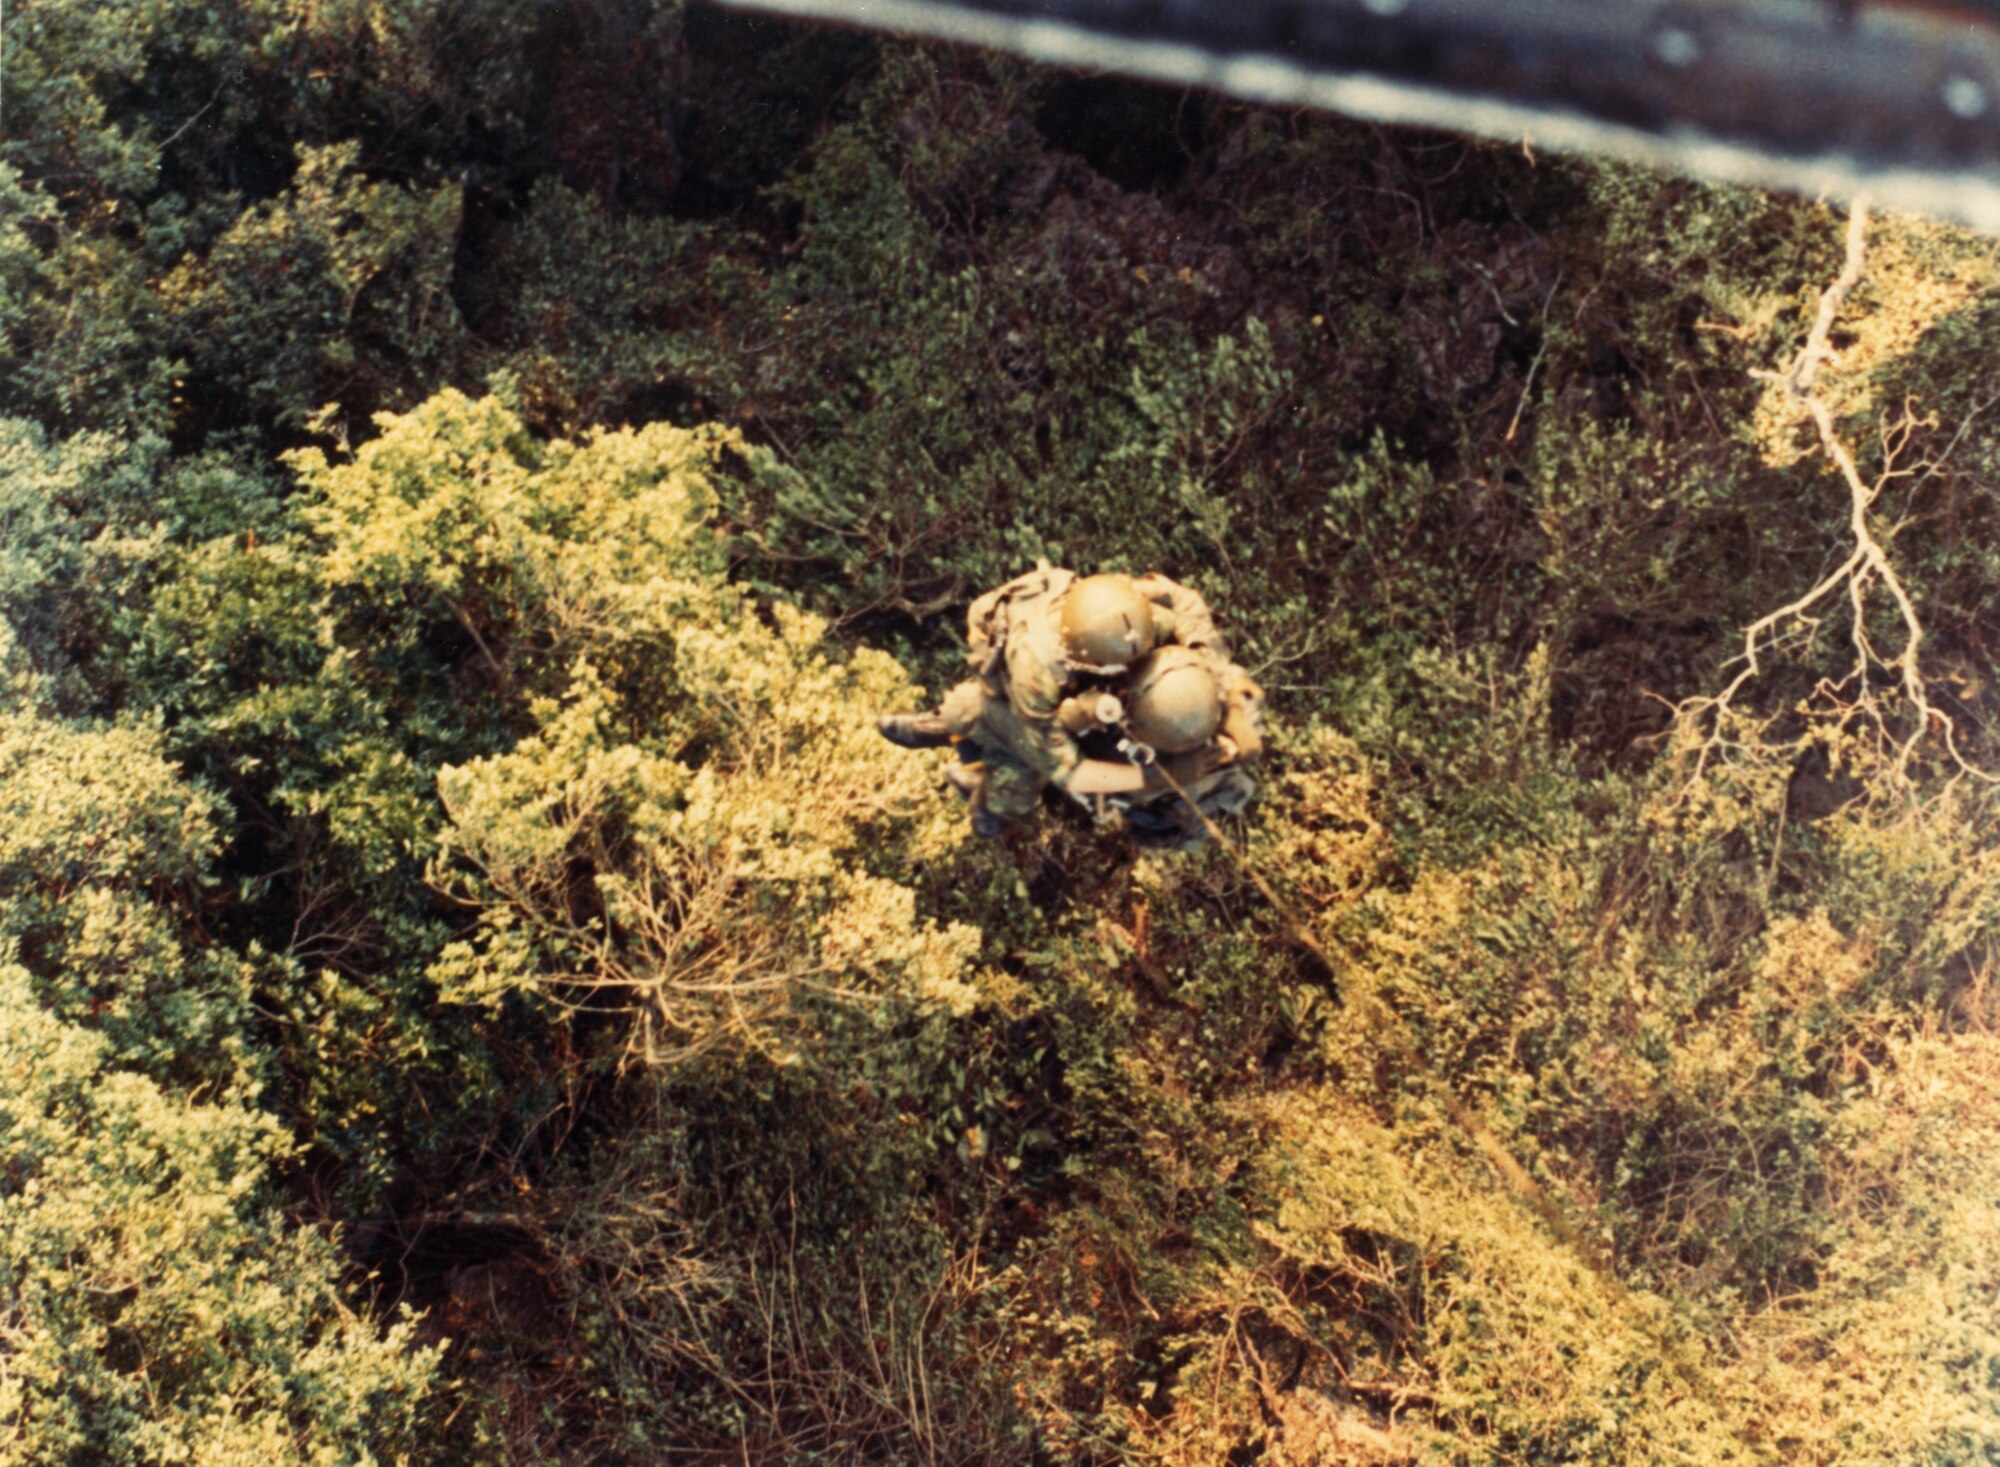 US Air Force pilot 1st Lt Glenn Fleming and a 40th ARR Squadron PJ are hoisted from the jungles of Laos by a USAF HH-43 helicopter on April 28, 1971.